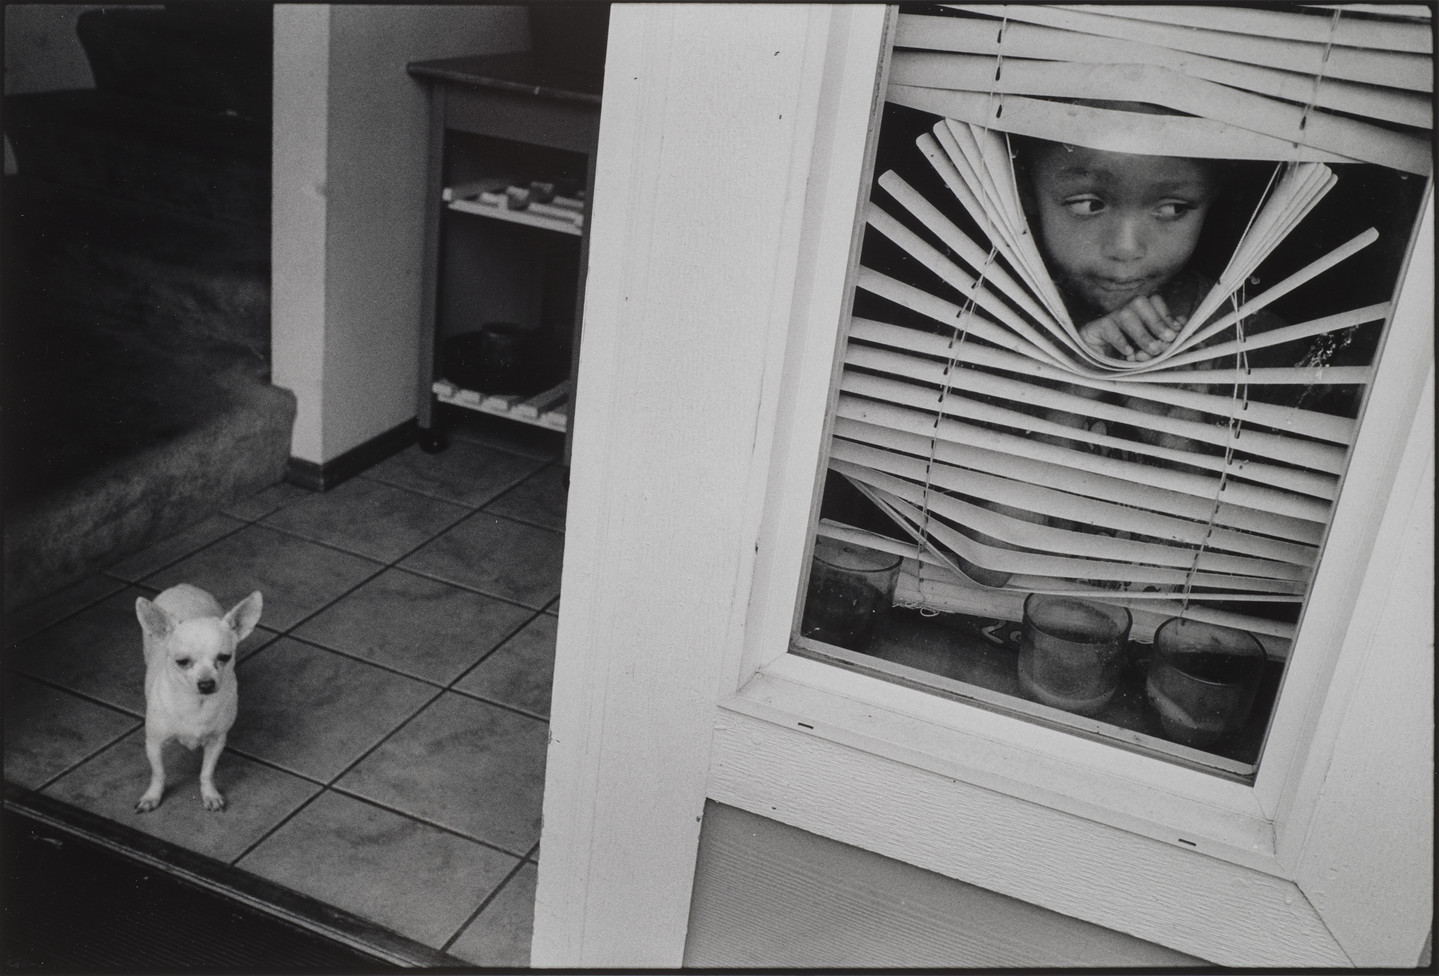 A black and white photograph of a young girl peering through slatted blinds to look out a window. Her gaze goes to the right of the frame. To her left, and on the other side of the window, a small white dog stands on a tiled floor.